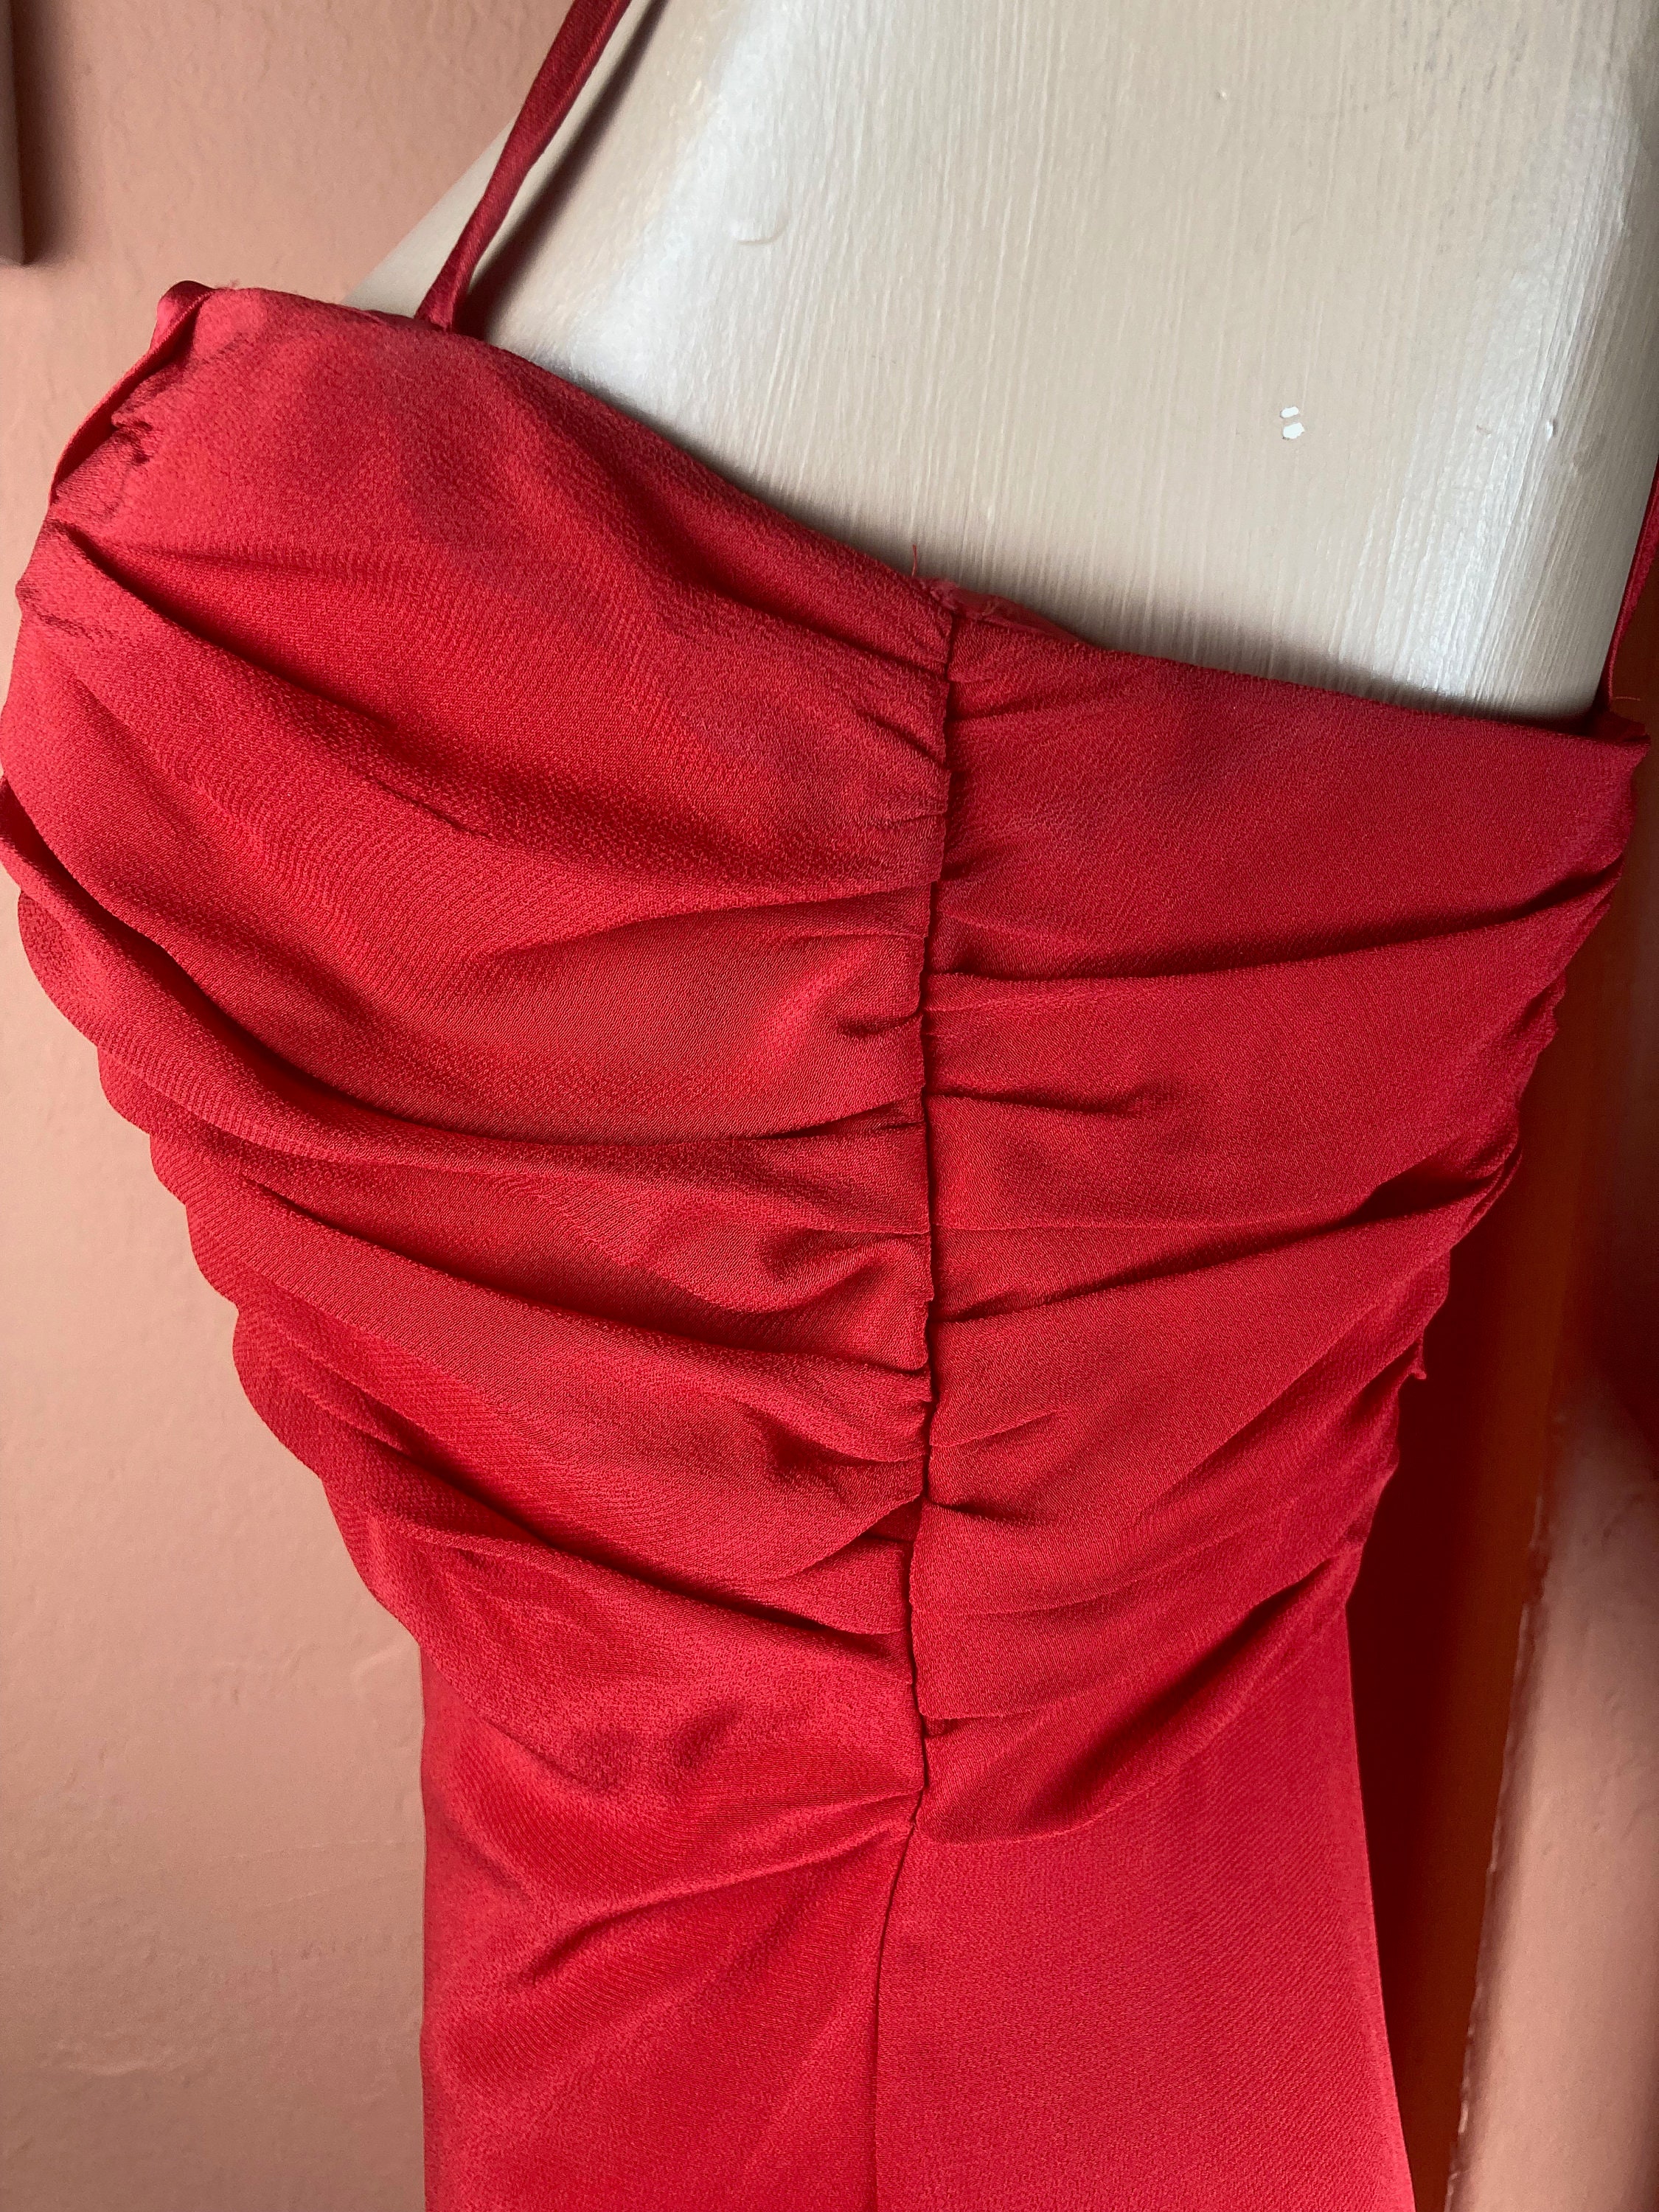 1970s / 1980s Draped Red Christian Dior Gown - Etsy